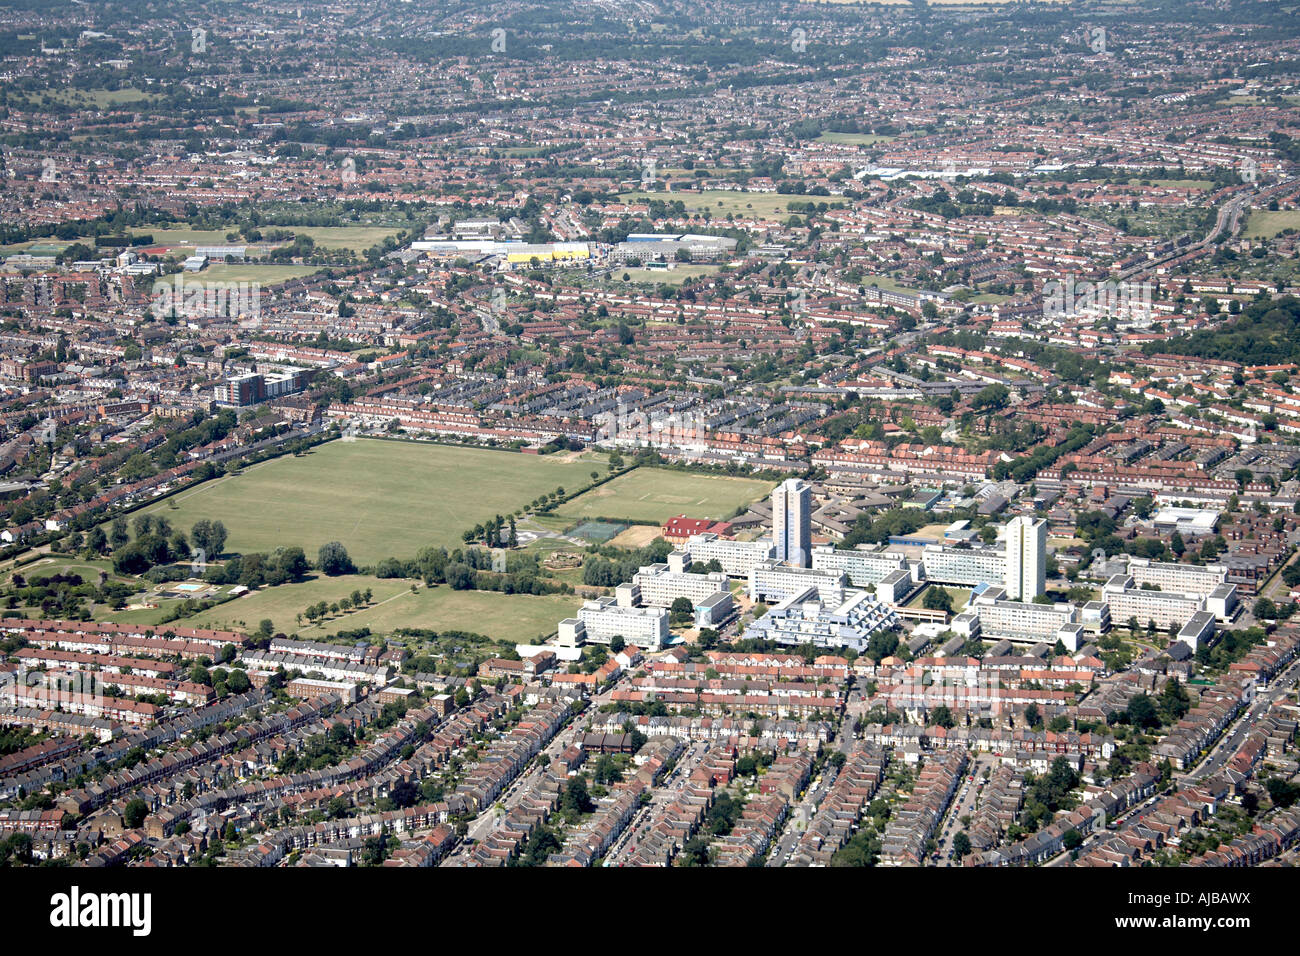 Aerial view west of Lordship Recreation Ground tower blocks and suburban housing Haringey London N17 England UK High level obli Stock Photo